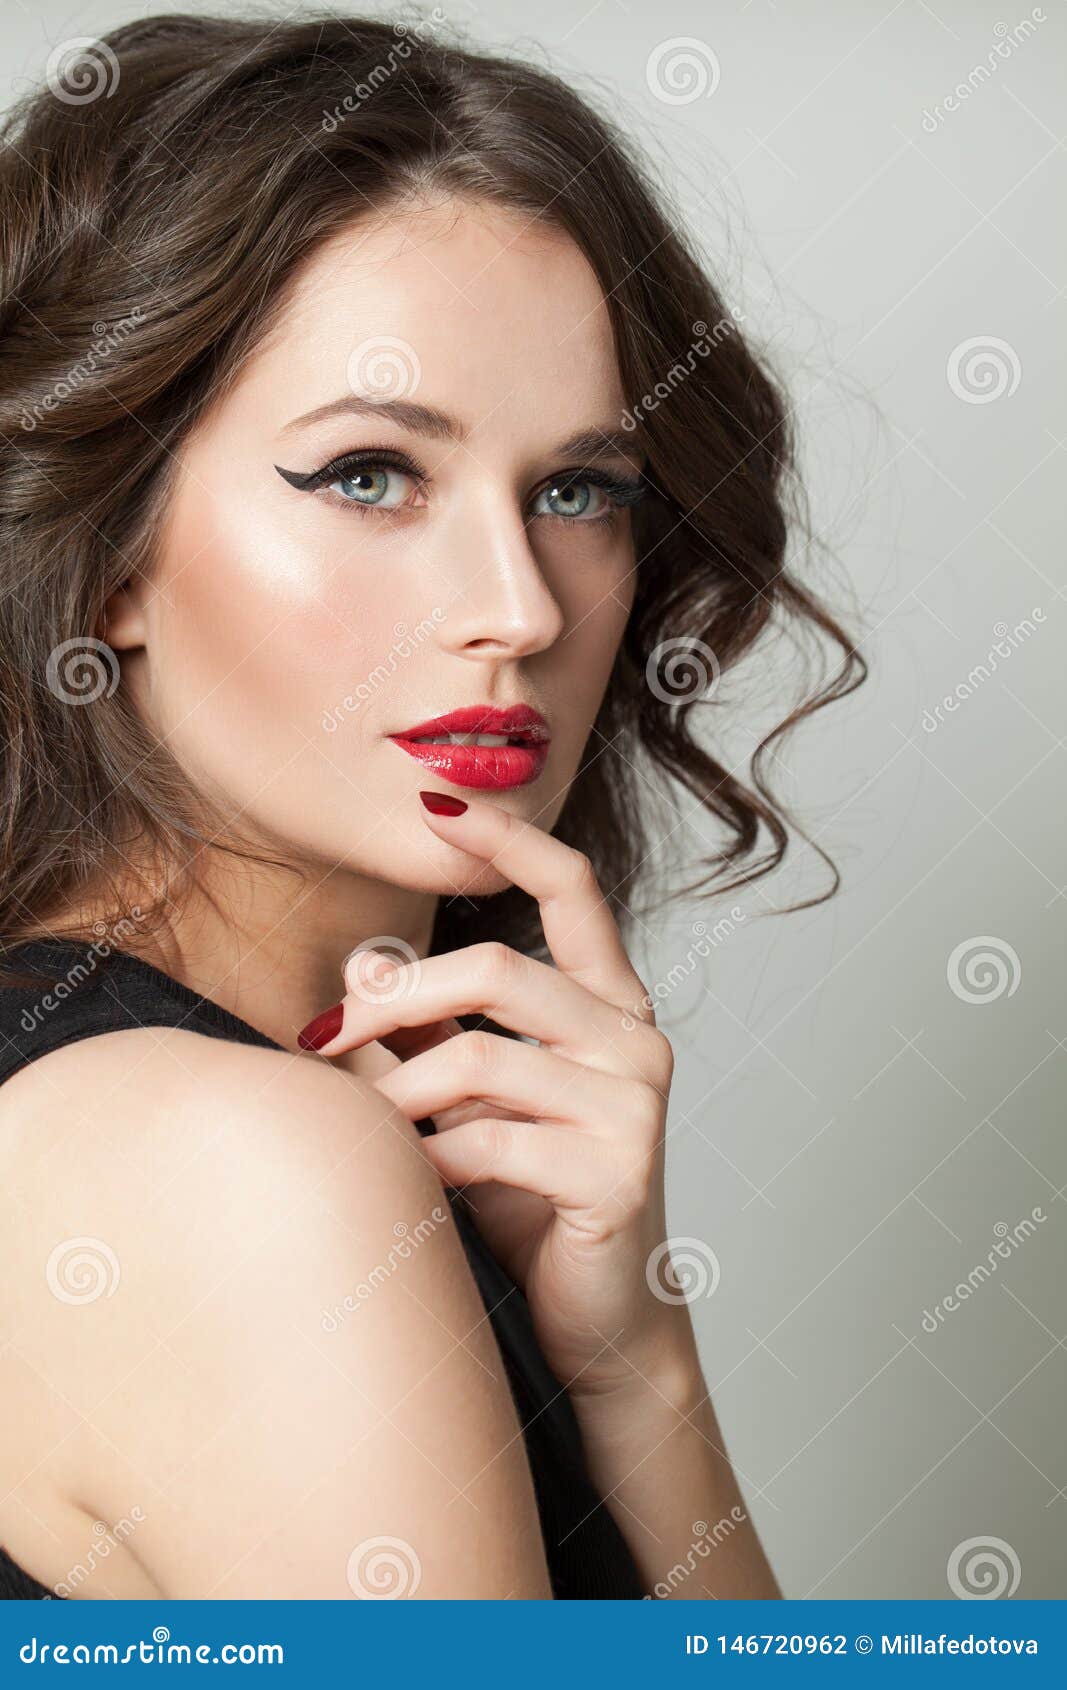 Cute Brunette Model Woman With Makeup And Brown Curly Hair